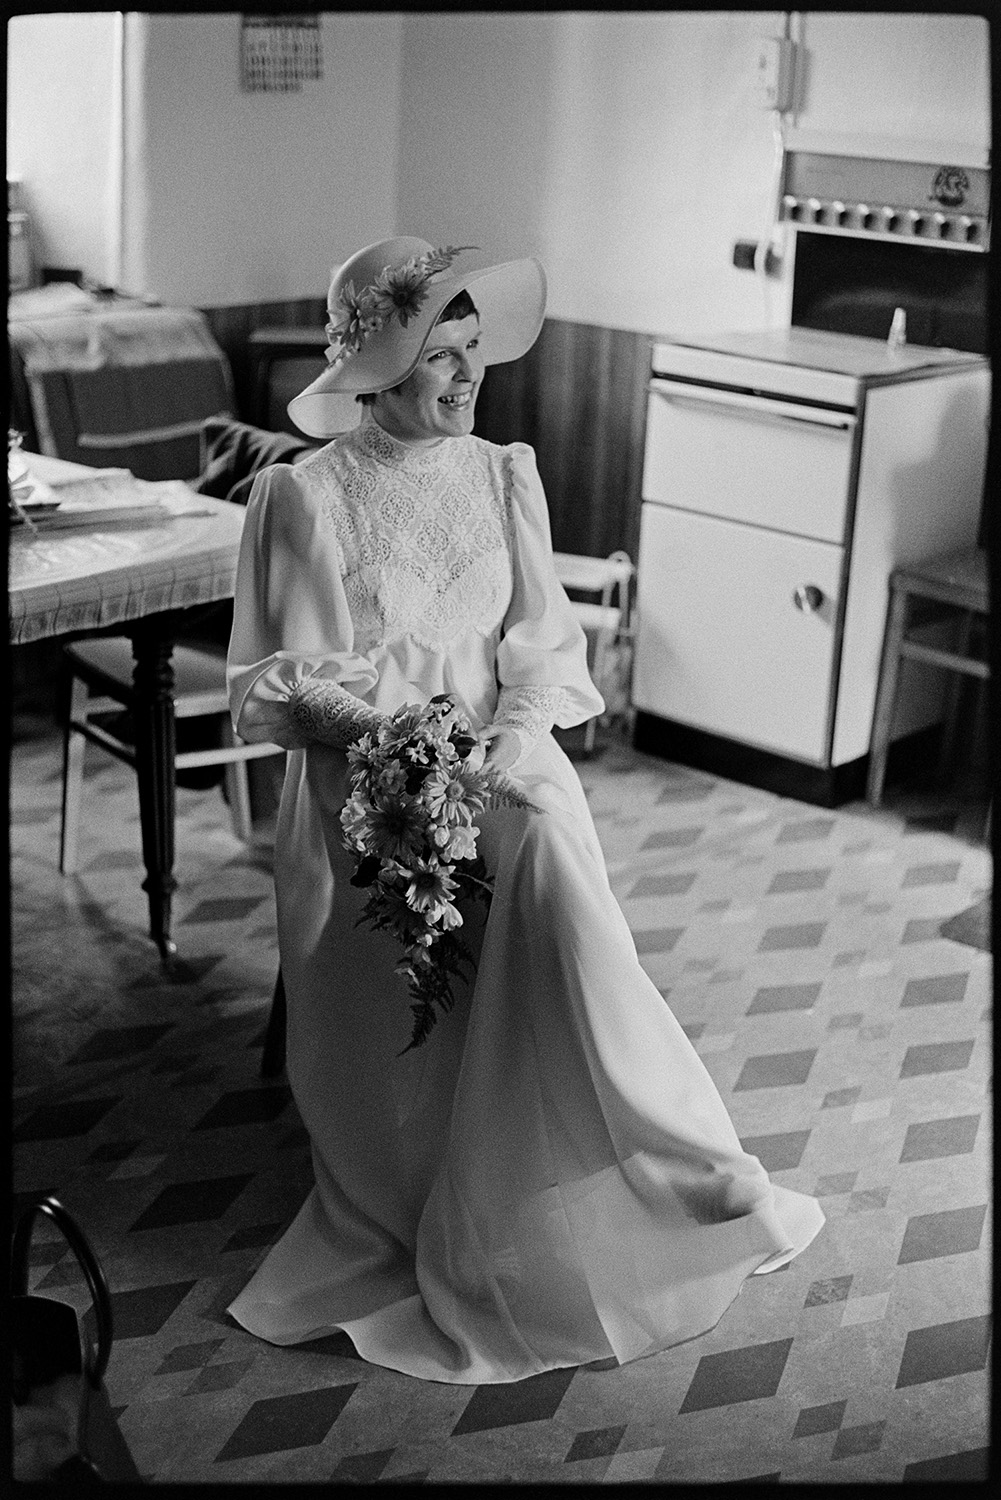 Bride and family at home, setting off for wedding in car with bridesmaid. 
[Mary Pugsley sat on a chair in her kitchen at Lower Langham, Dolton. She is holding a bouquet and wearing a hat decorated with flowers. A cooker can be seen in the background.]